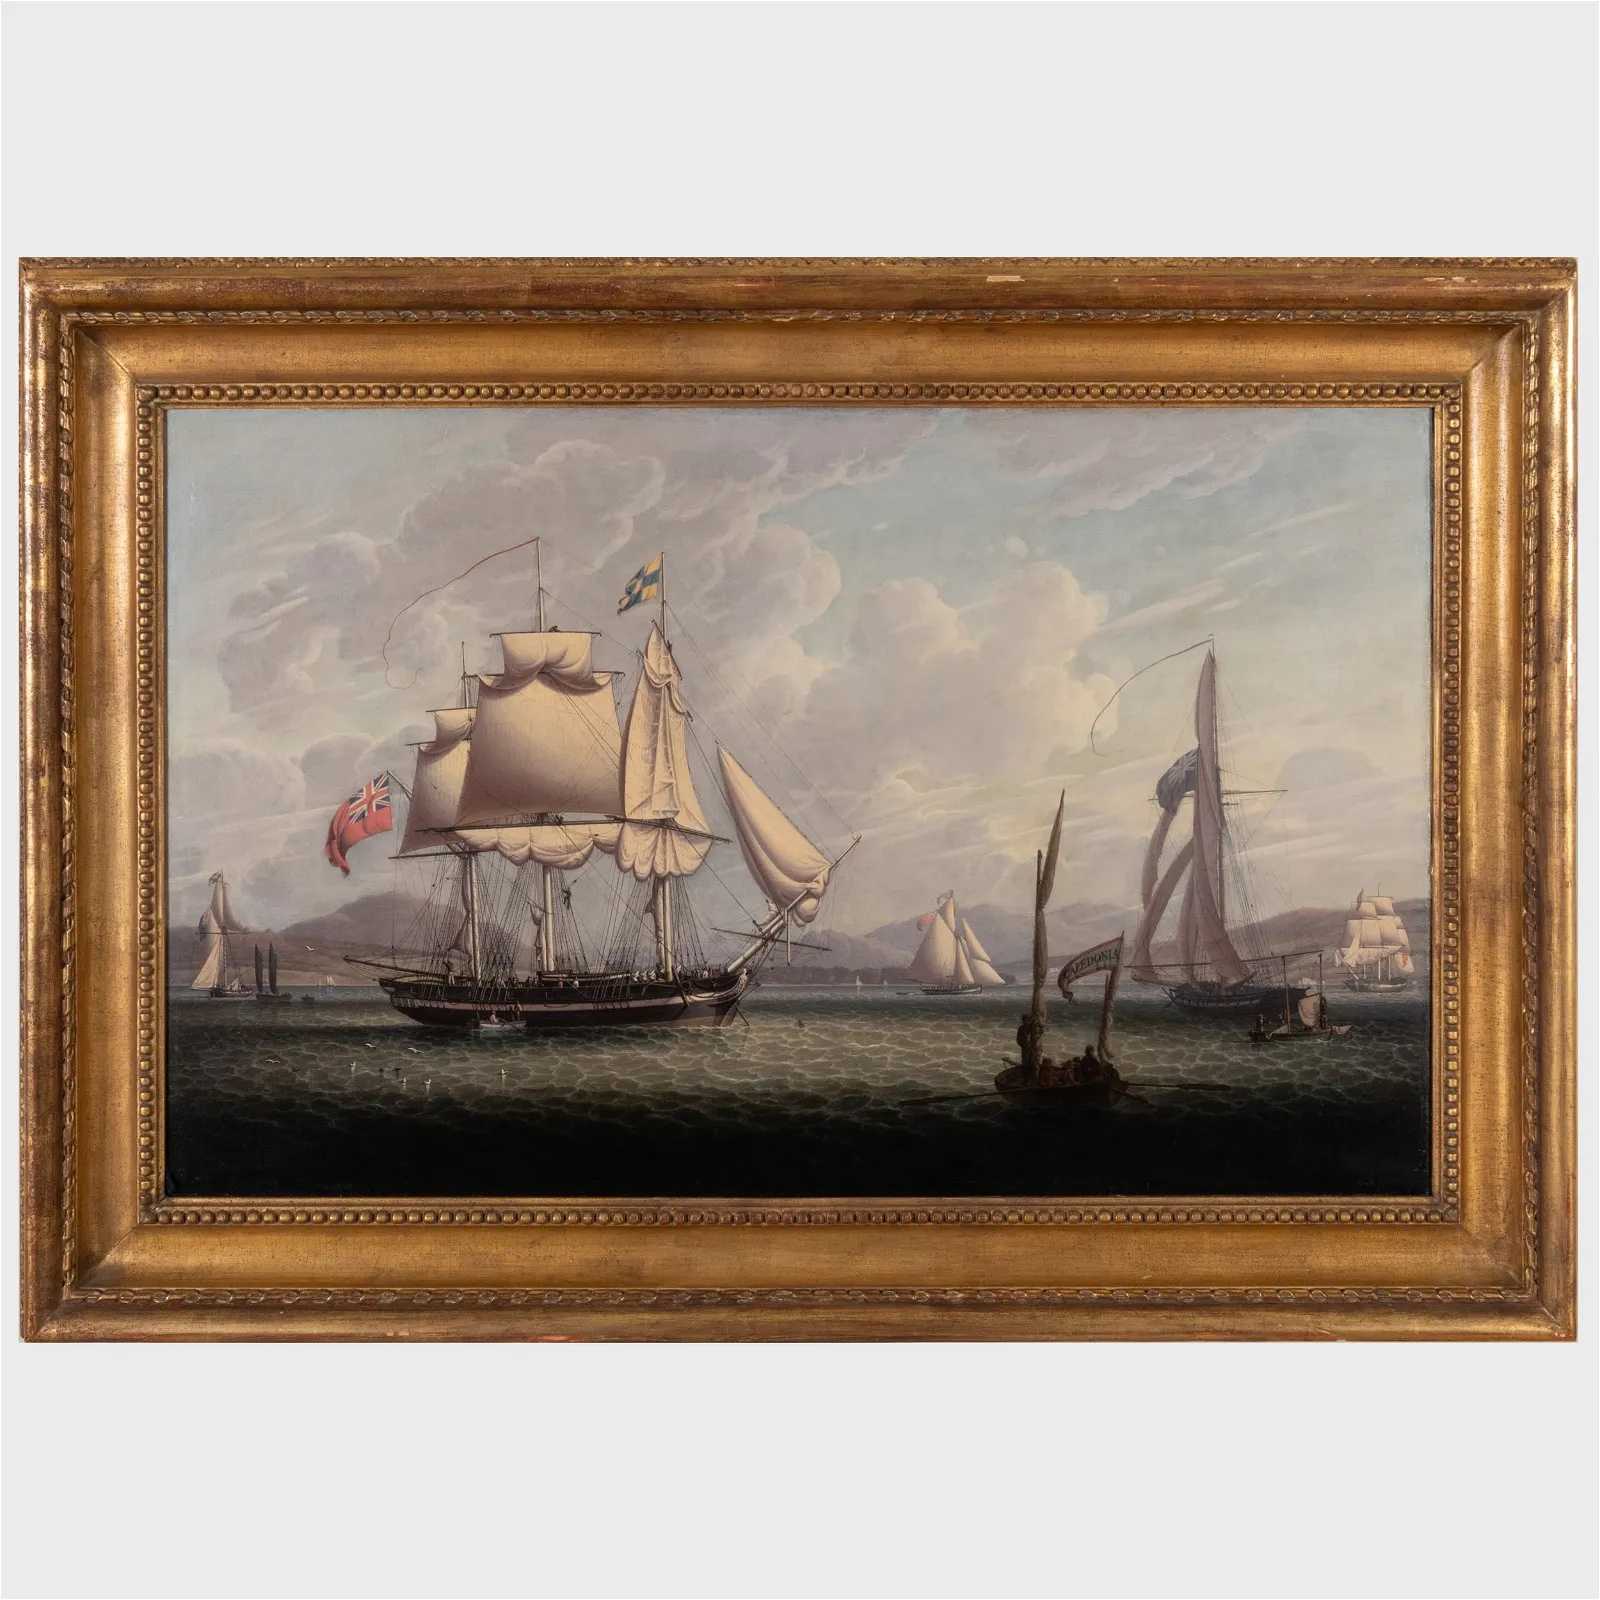 Robert Salmon, 'The Pomona of Greenock Riding at Anchor', which sold for $28,000 ($35,840 with buyer’s premium) at Stair.